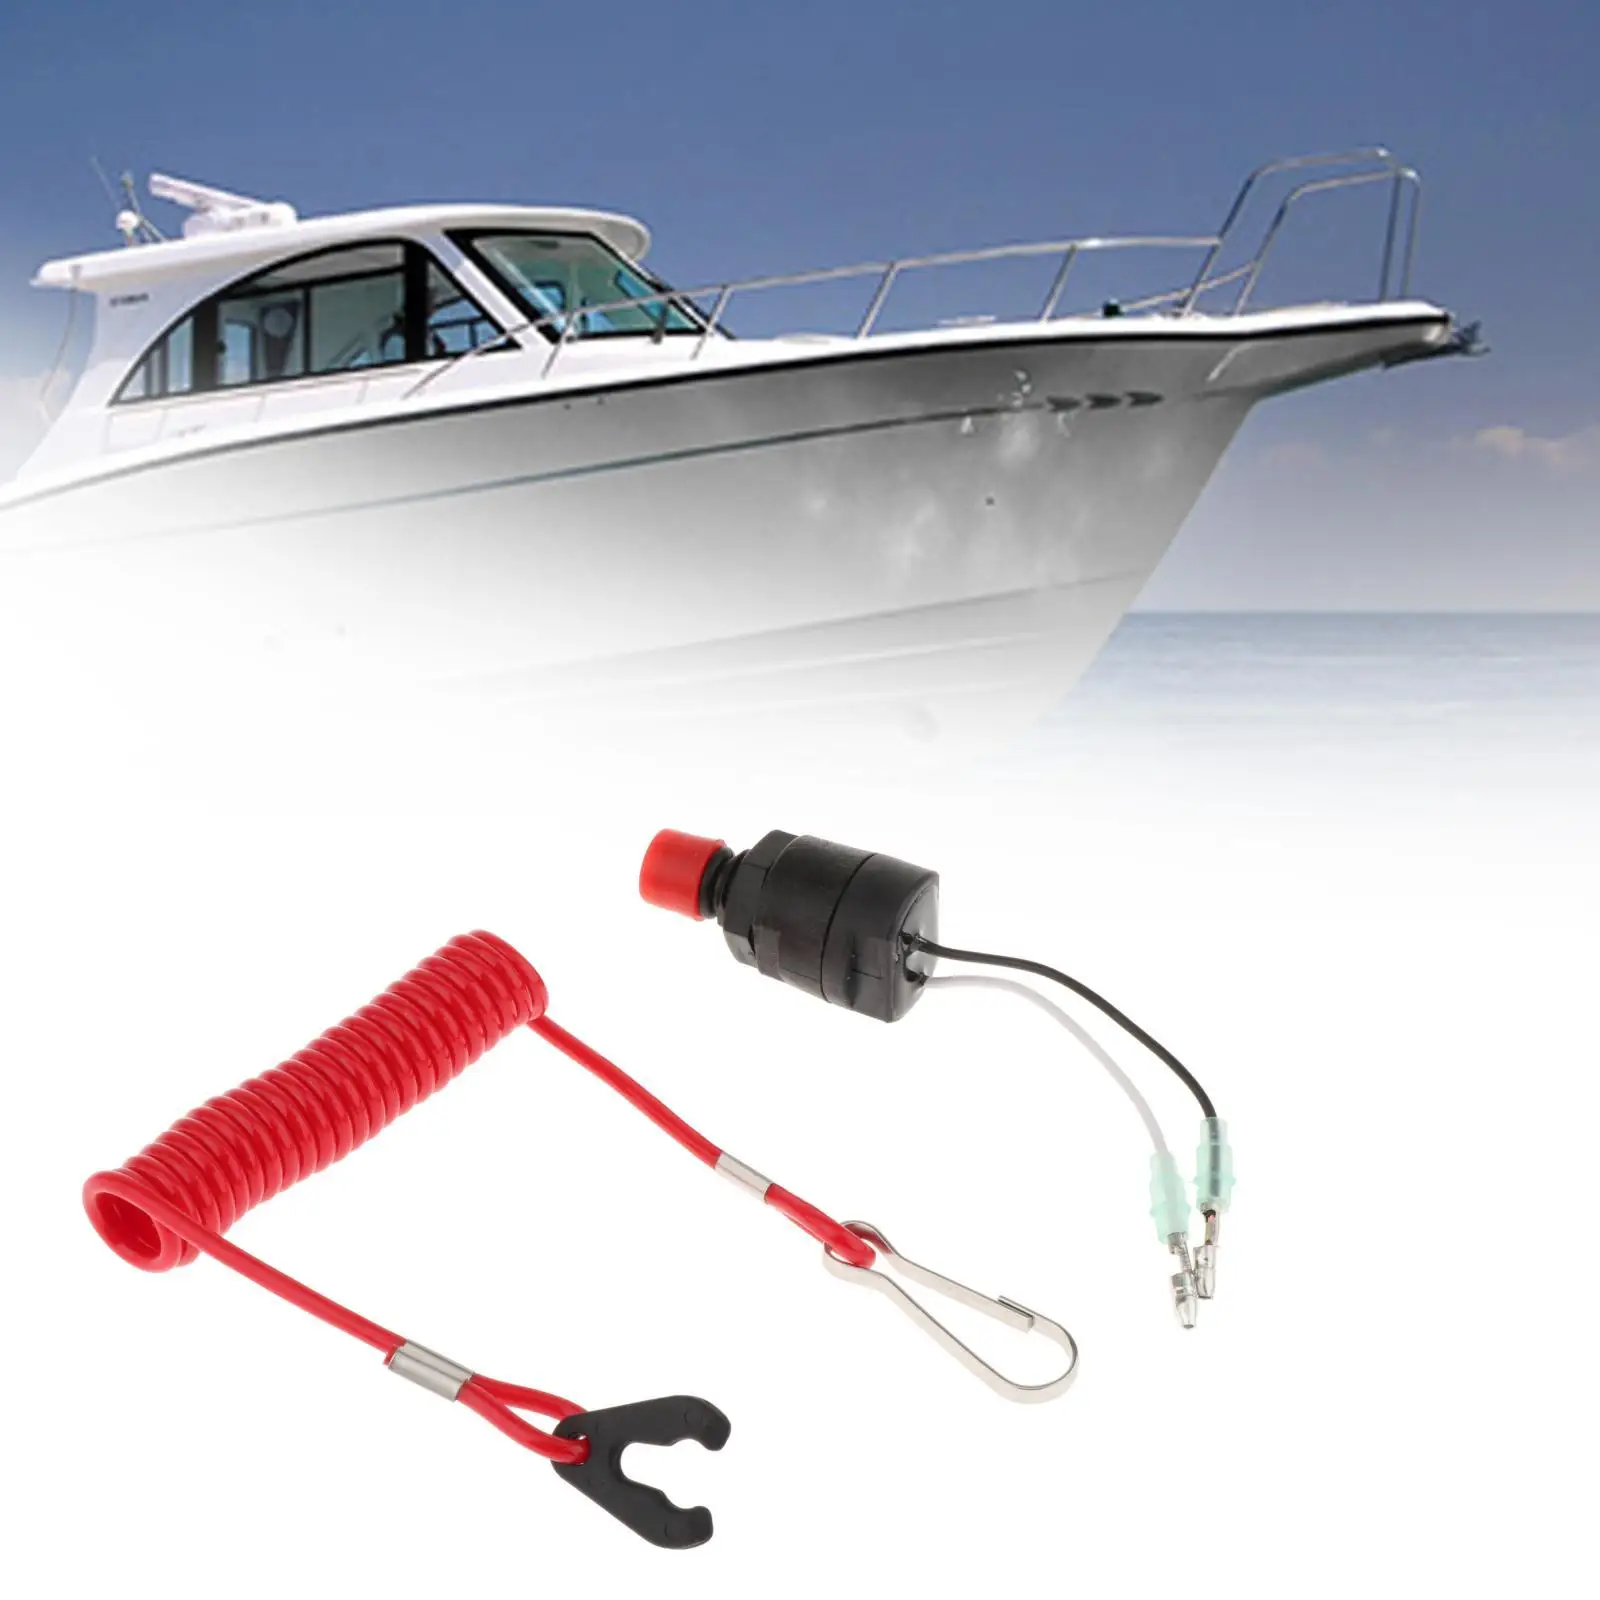 Kill Stop Switch & Safety Lanyard Replacement Assy for Yamaha Outboard Engine Boat Parts High Performance Easy Installation